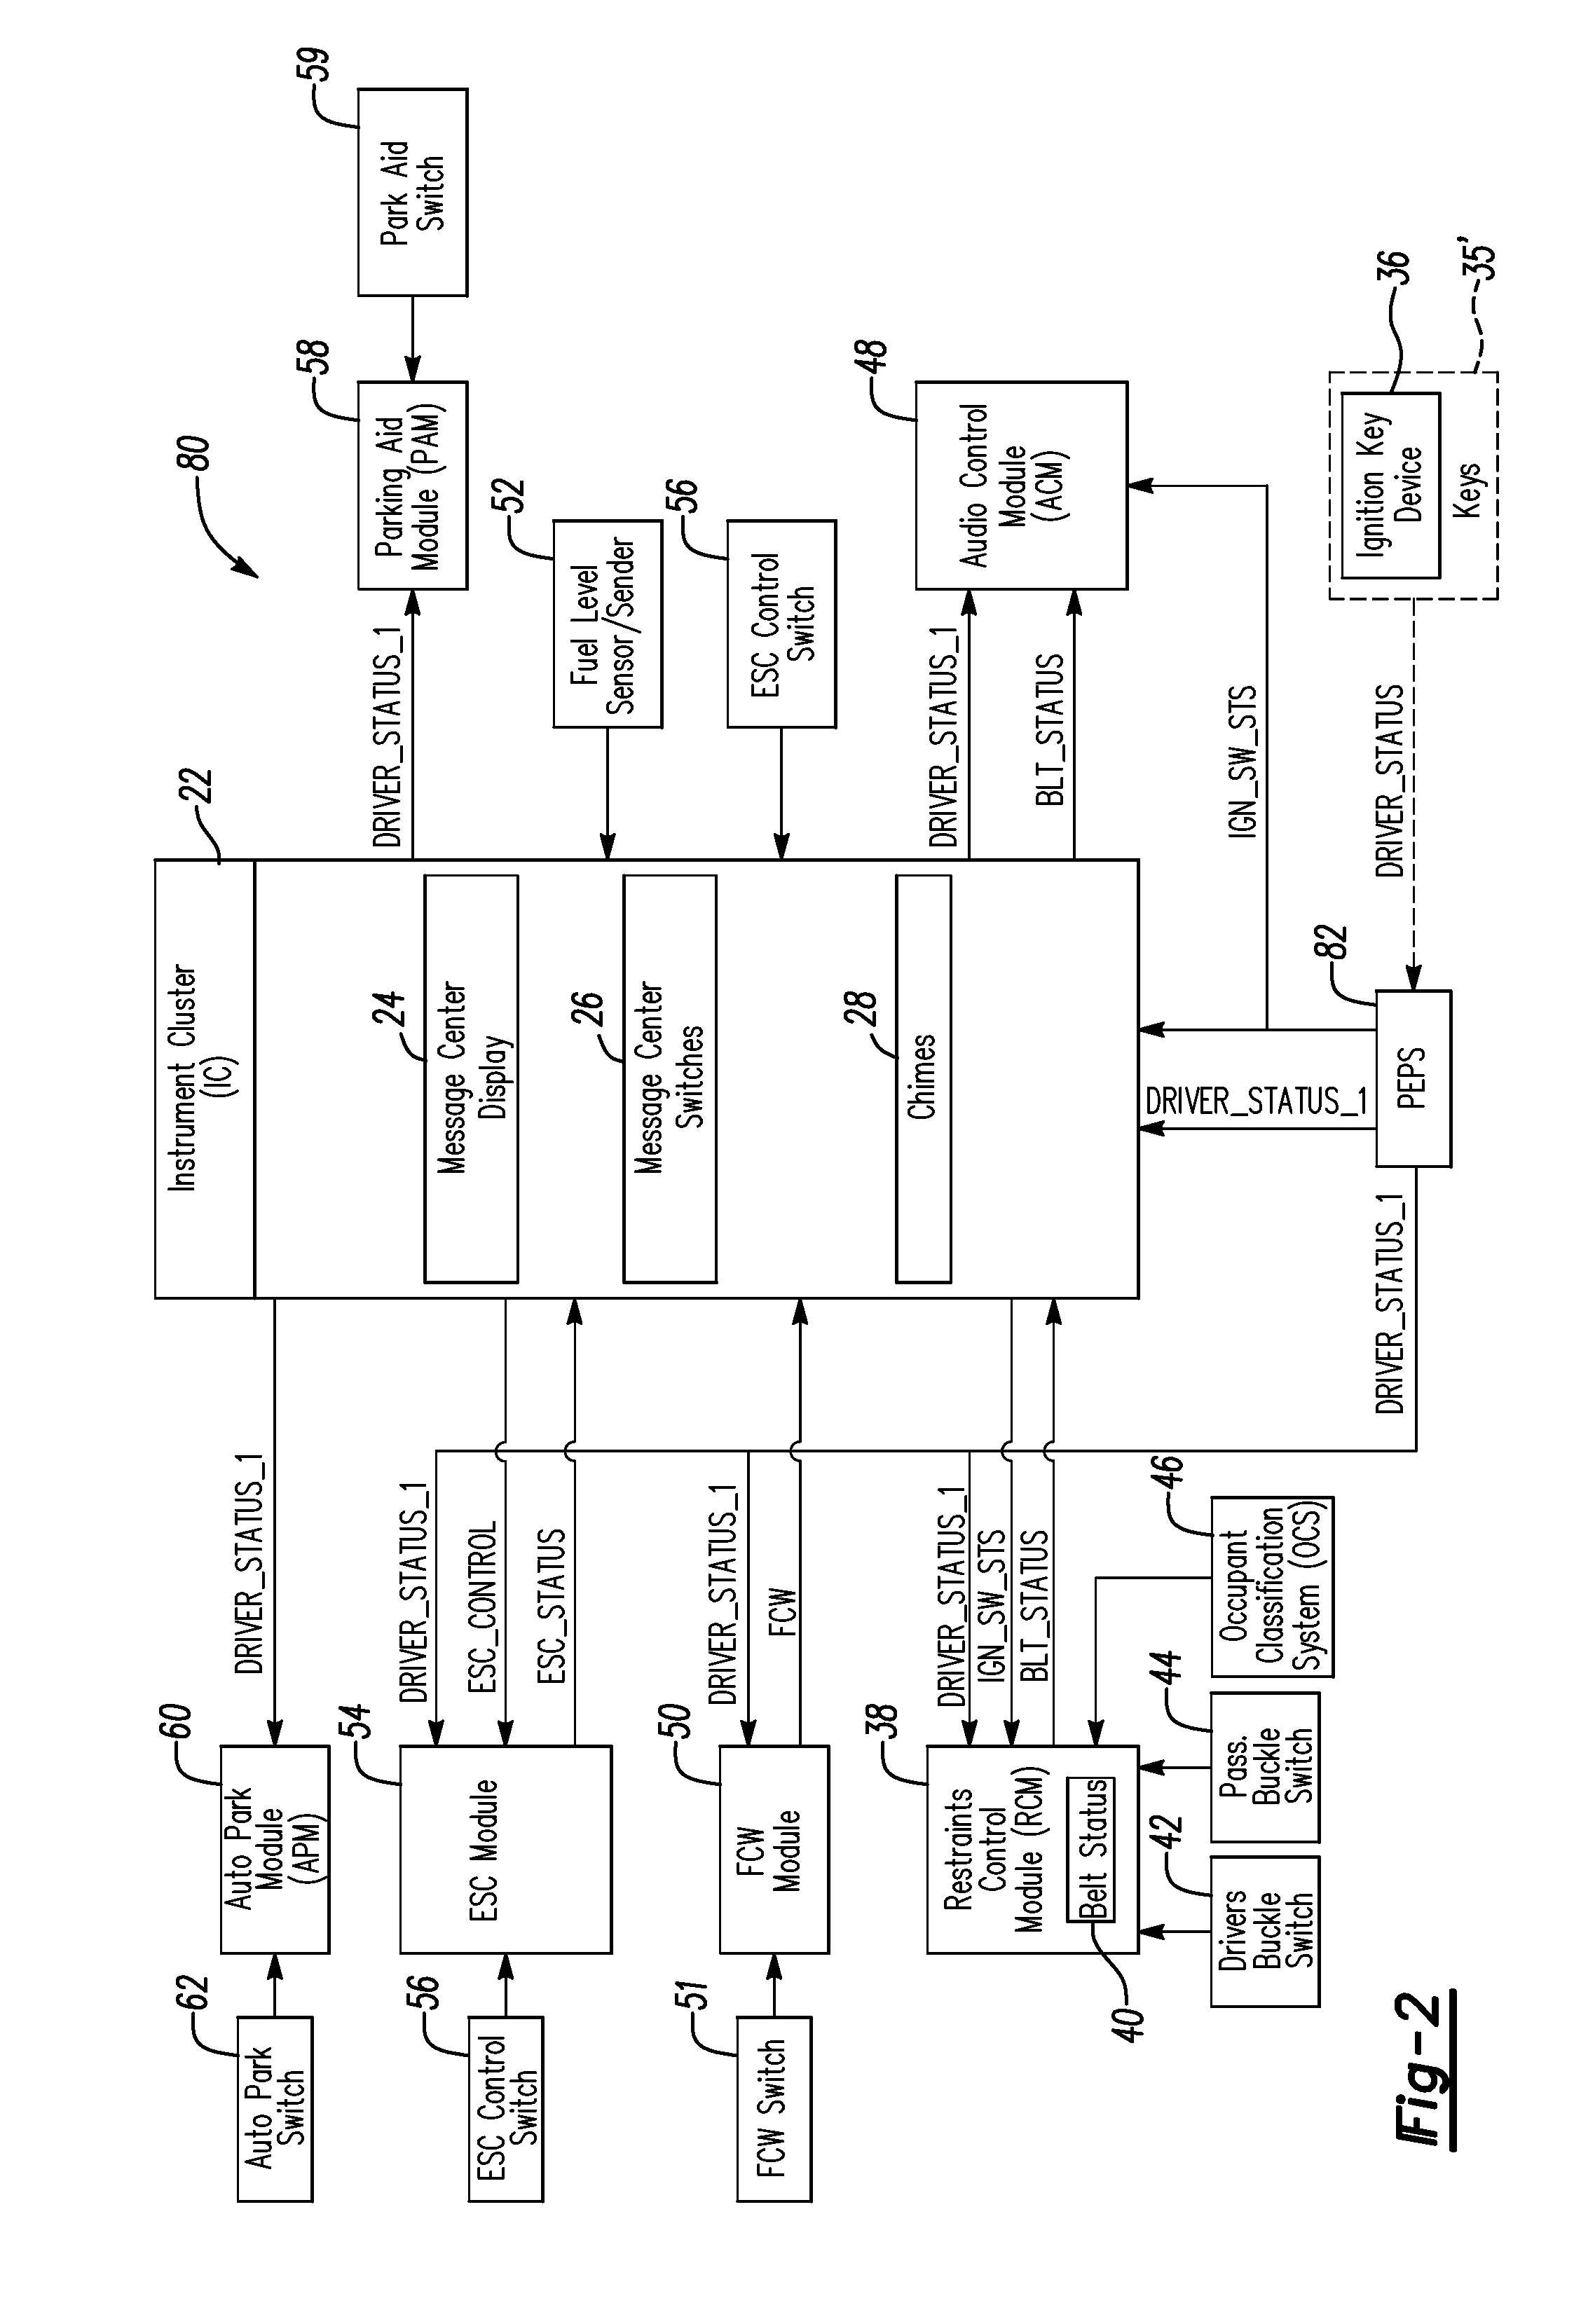 System and method for controlling a safety restraint status based on driver status